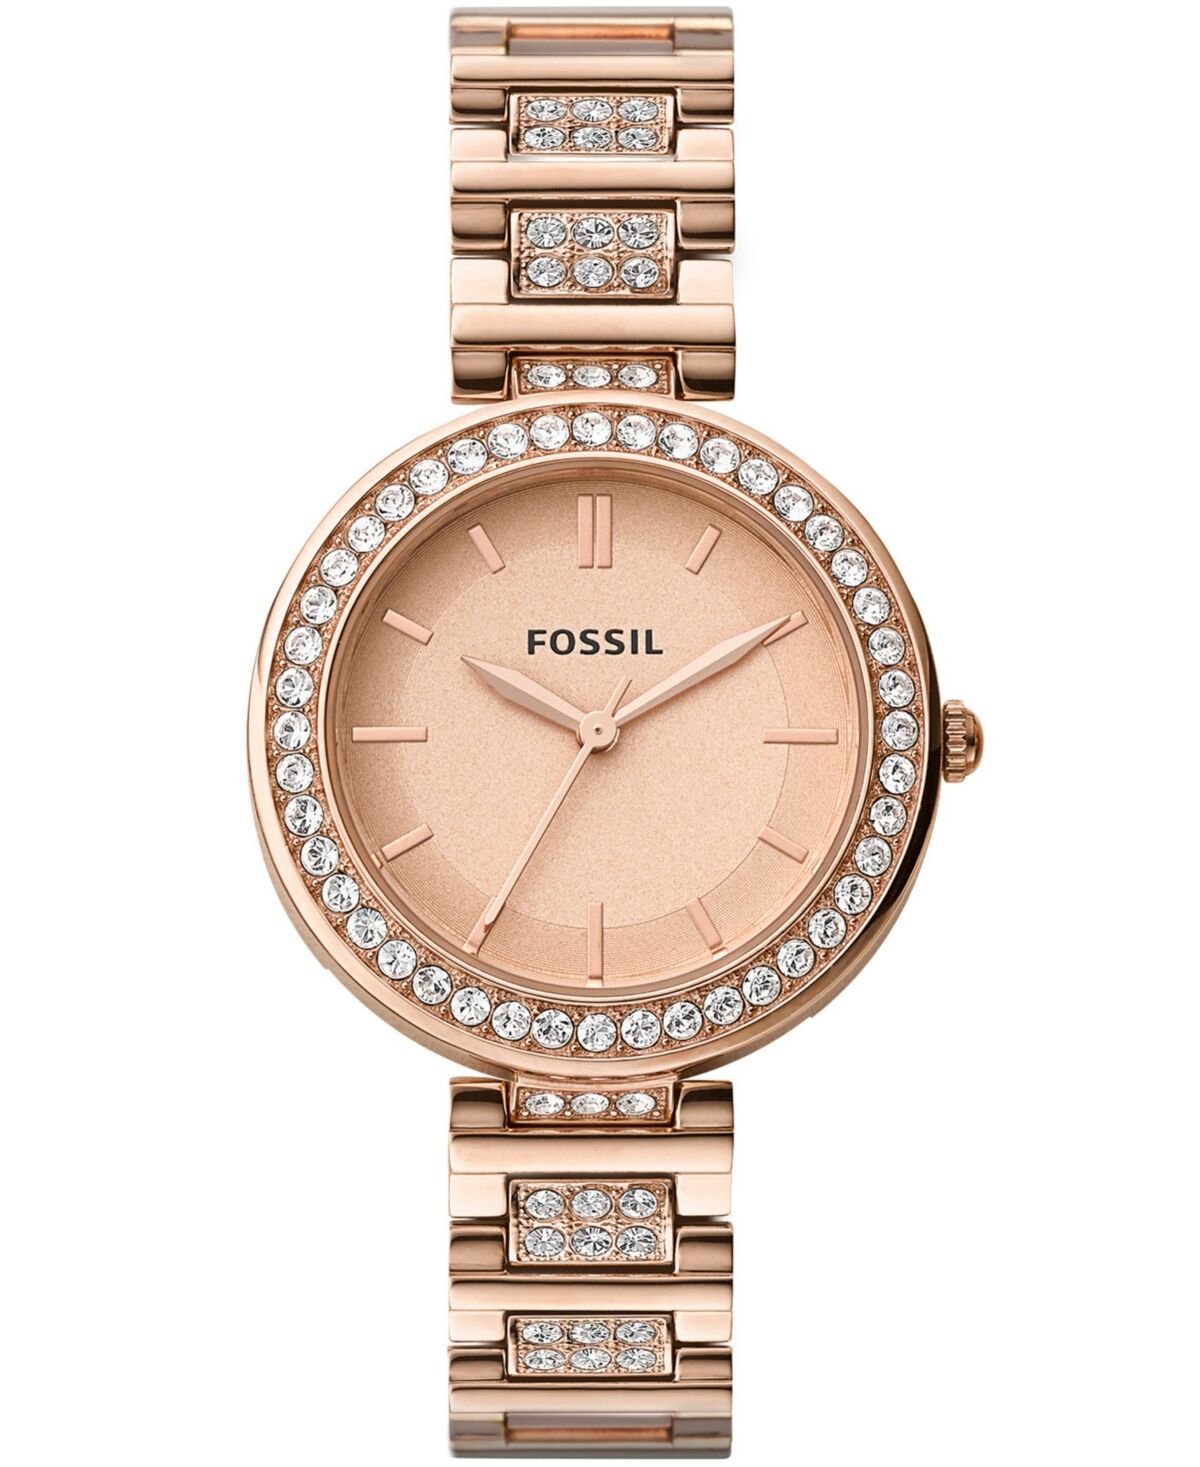 Fossil Women's Karli Three Hand Rose Gold Stainless Steel Watch 34mm - Rose Gold